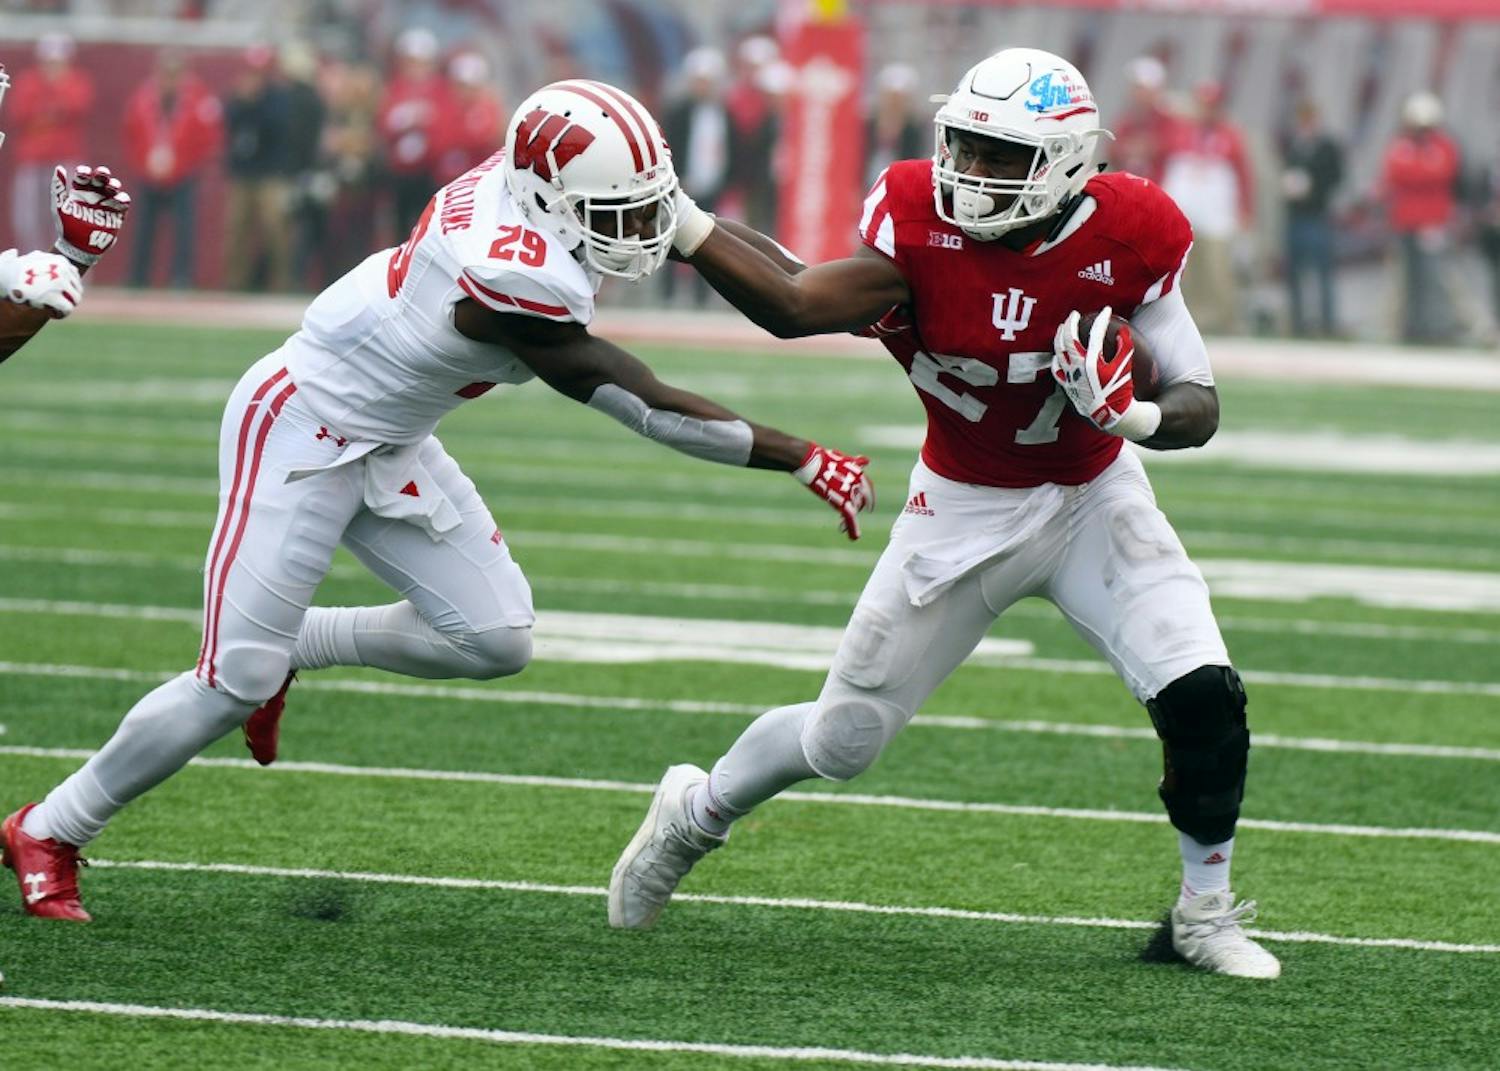 GALLERY: IU football loses to Wisconsin 17-45